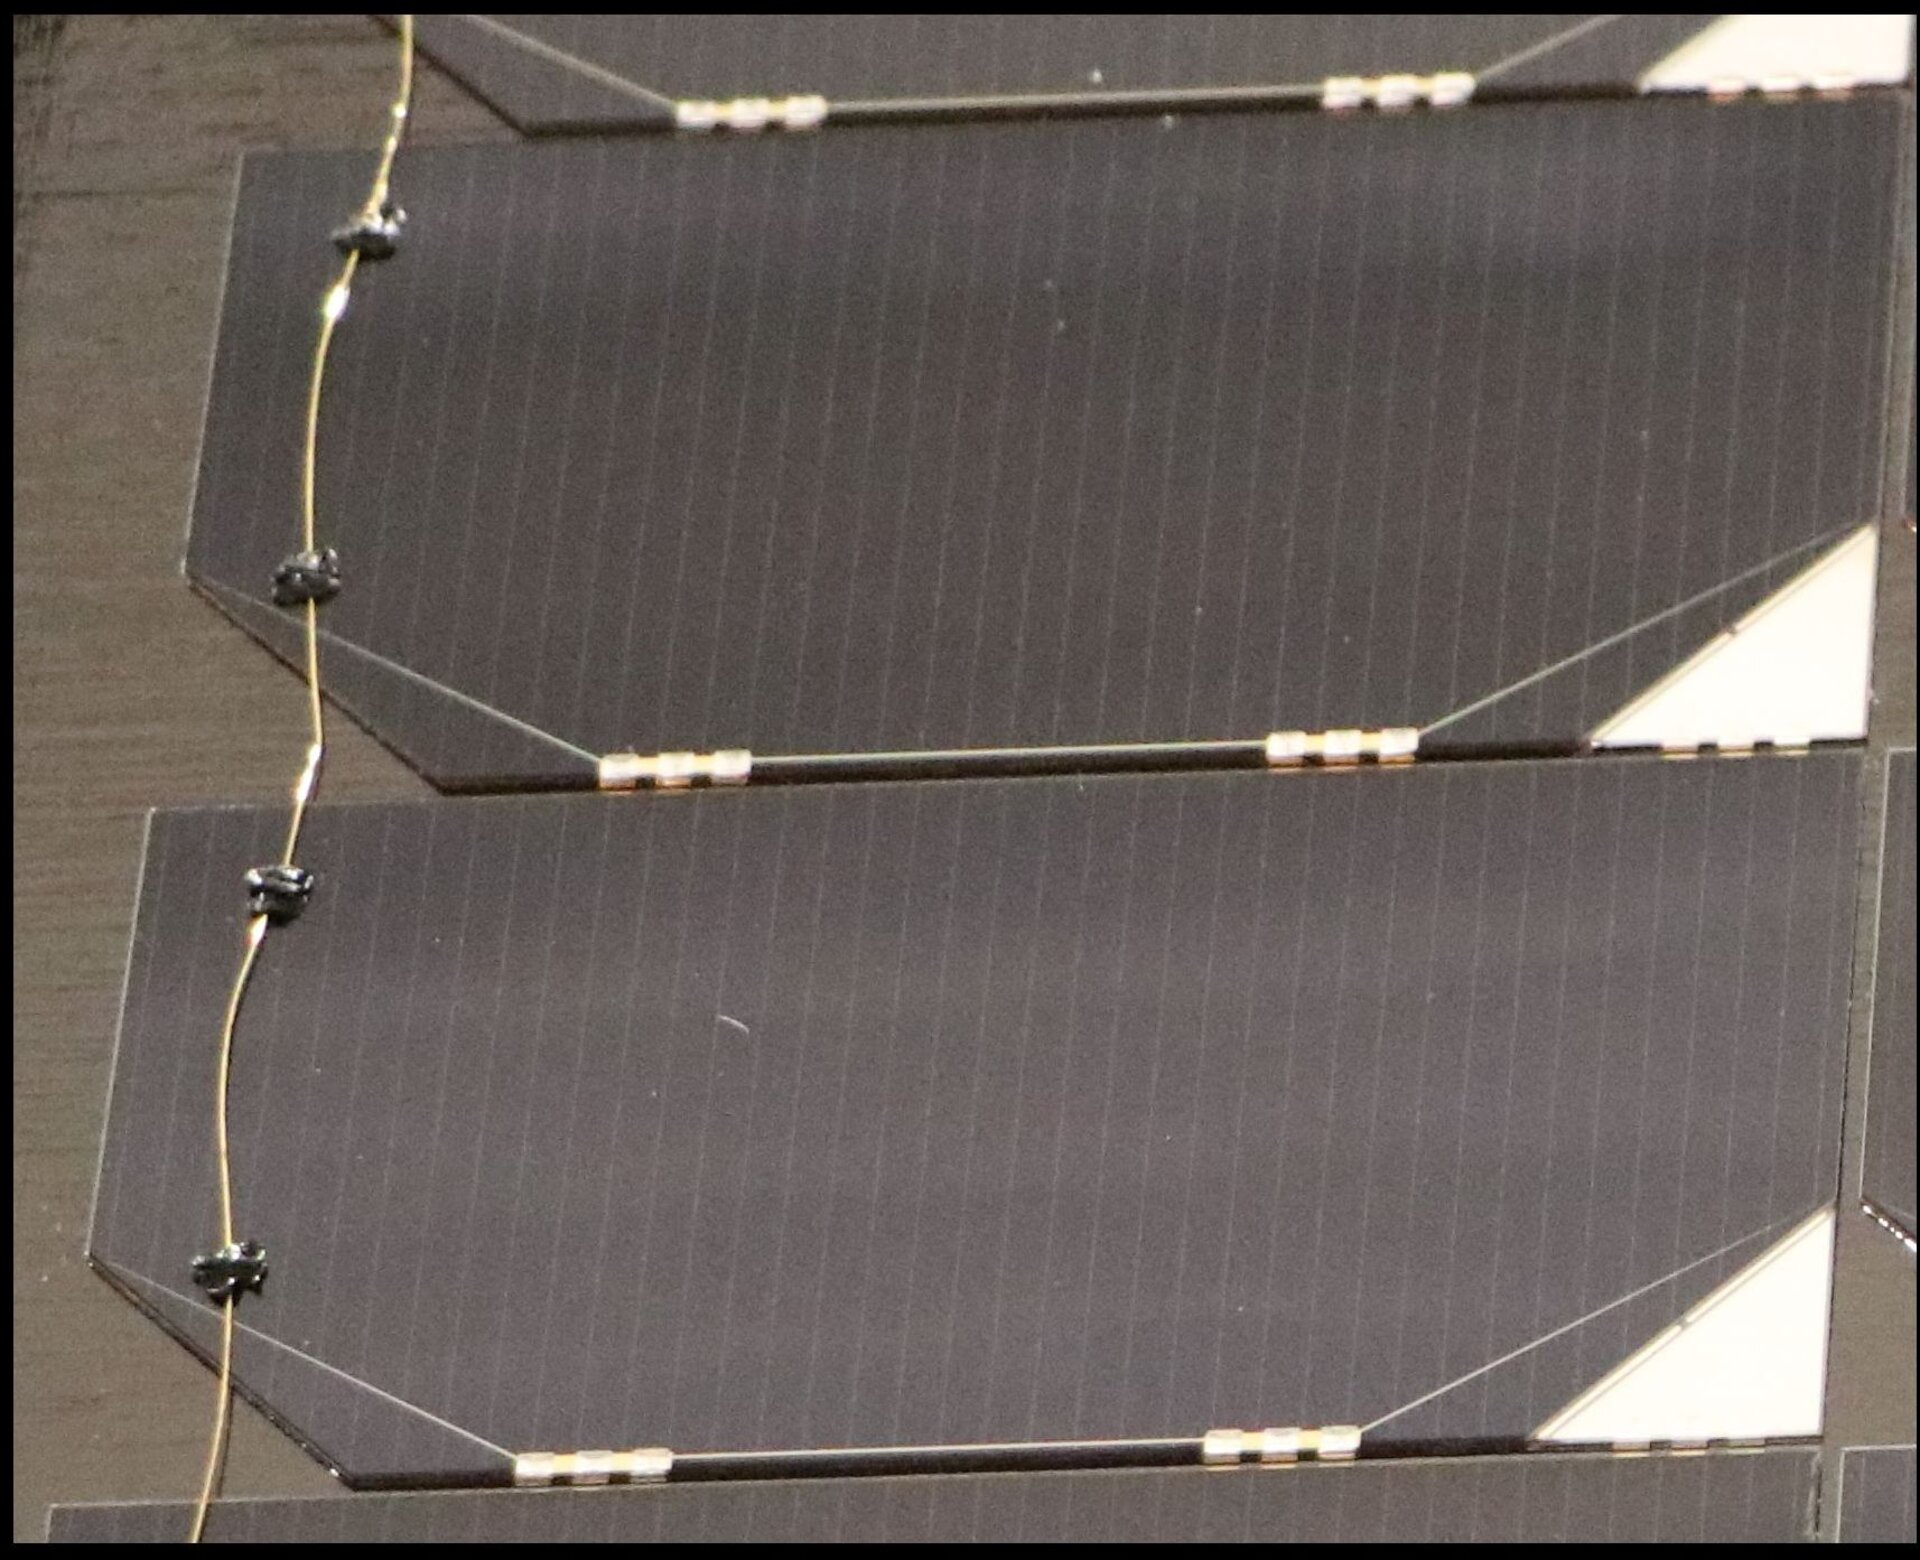 Juice solar cells with cover glass and grounding network of tiny wires